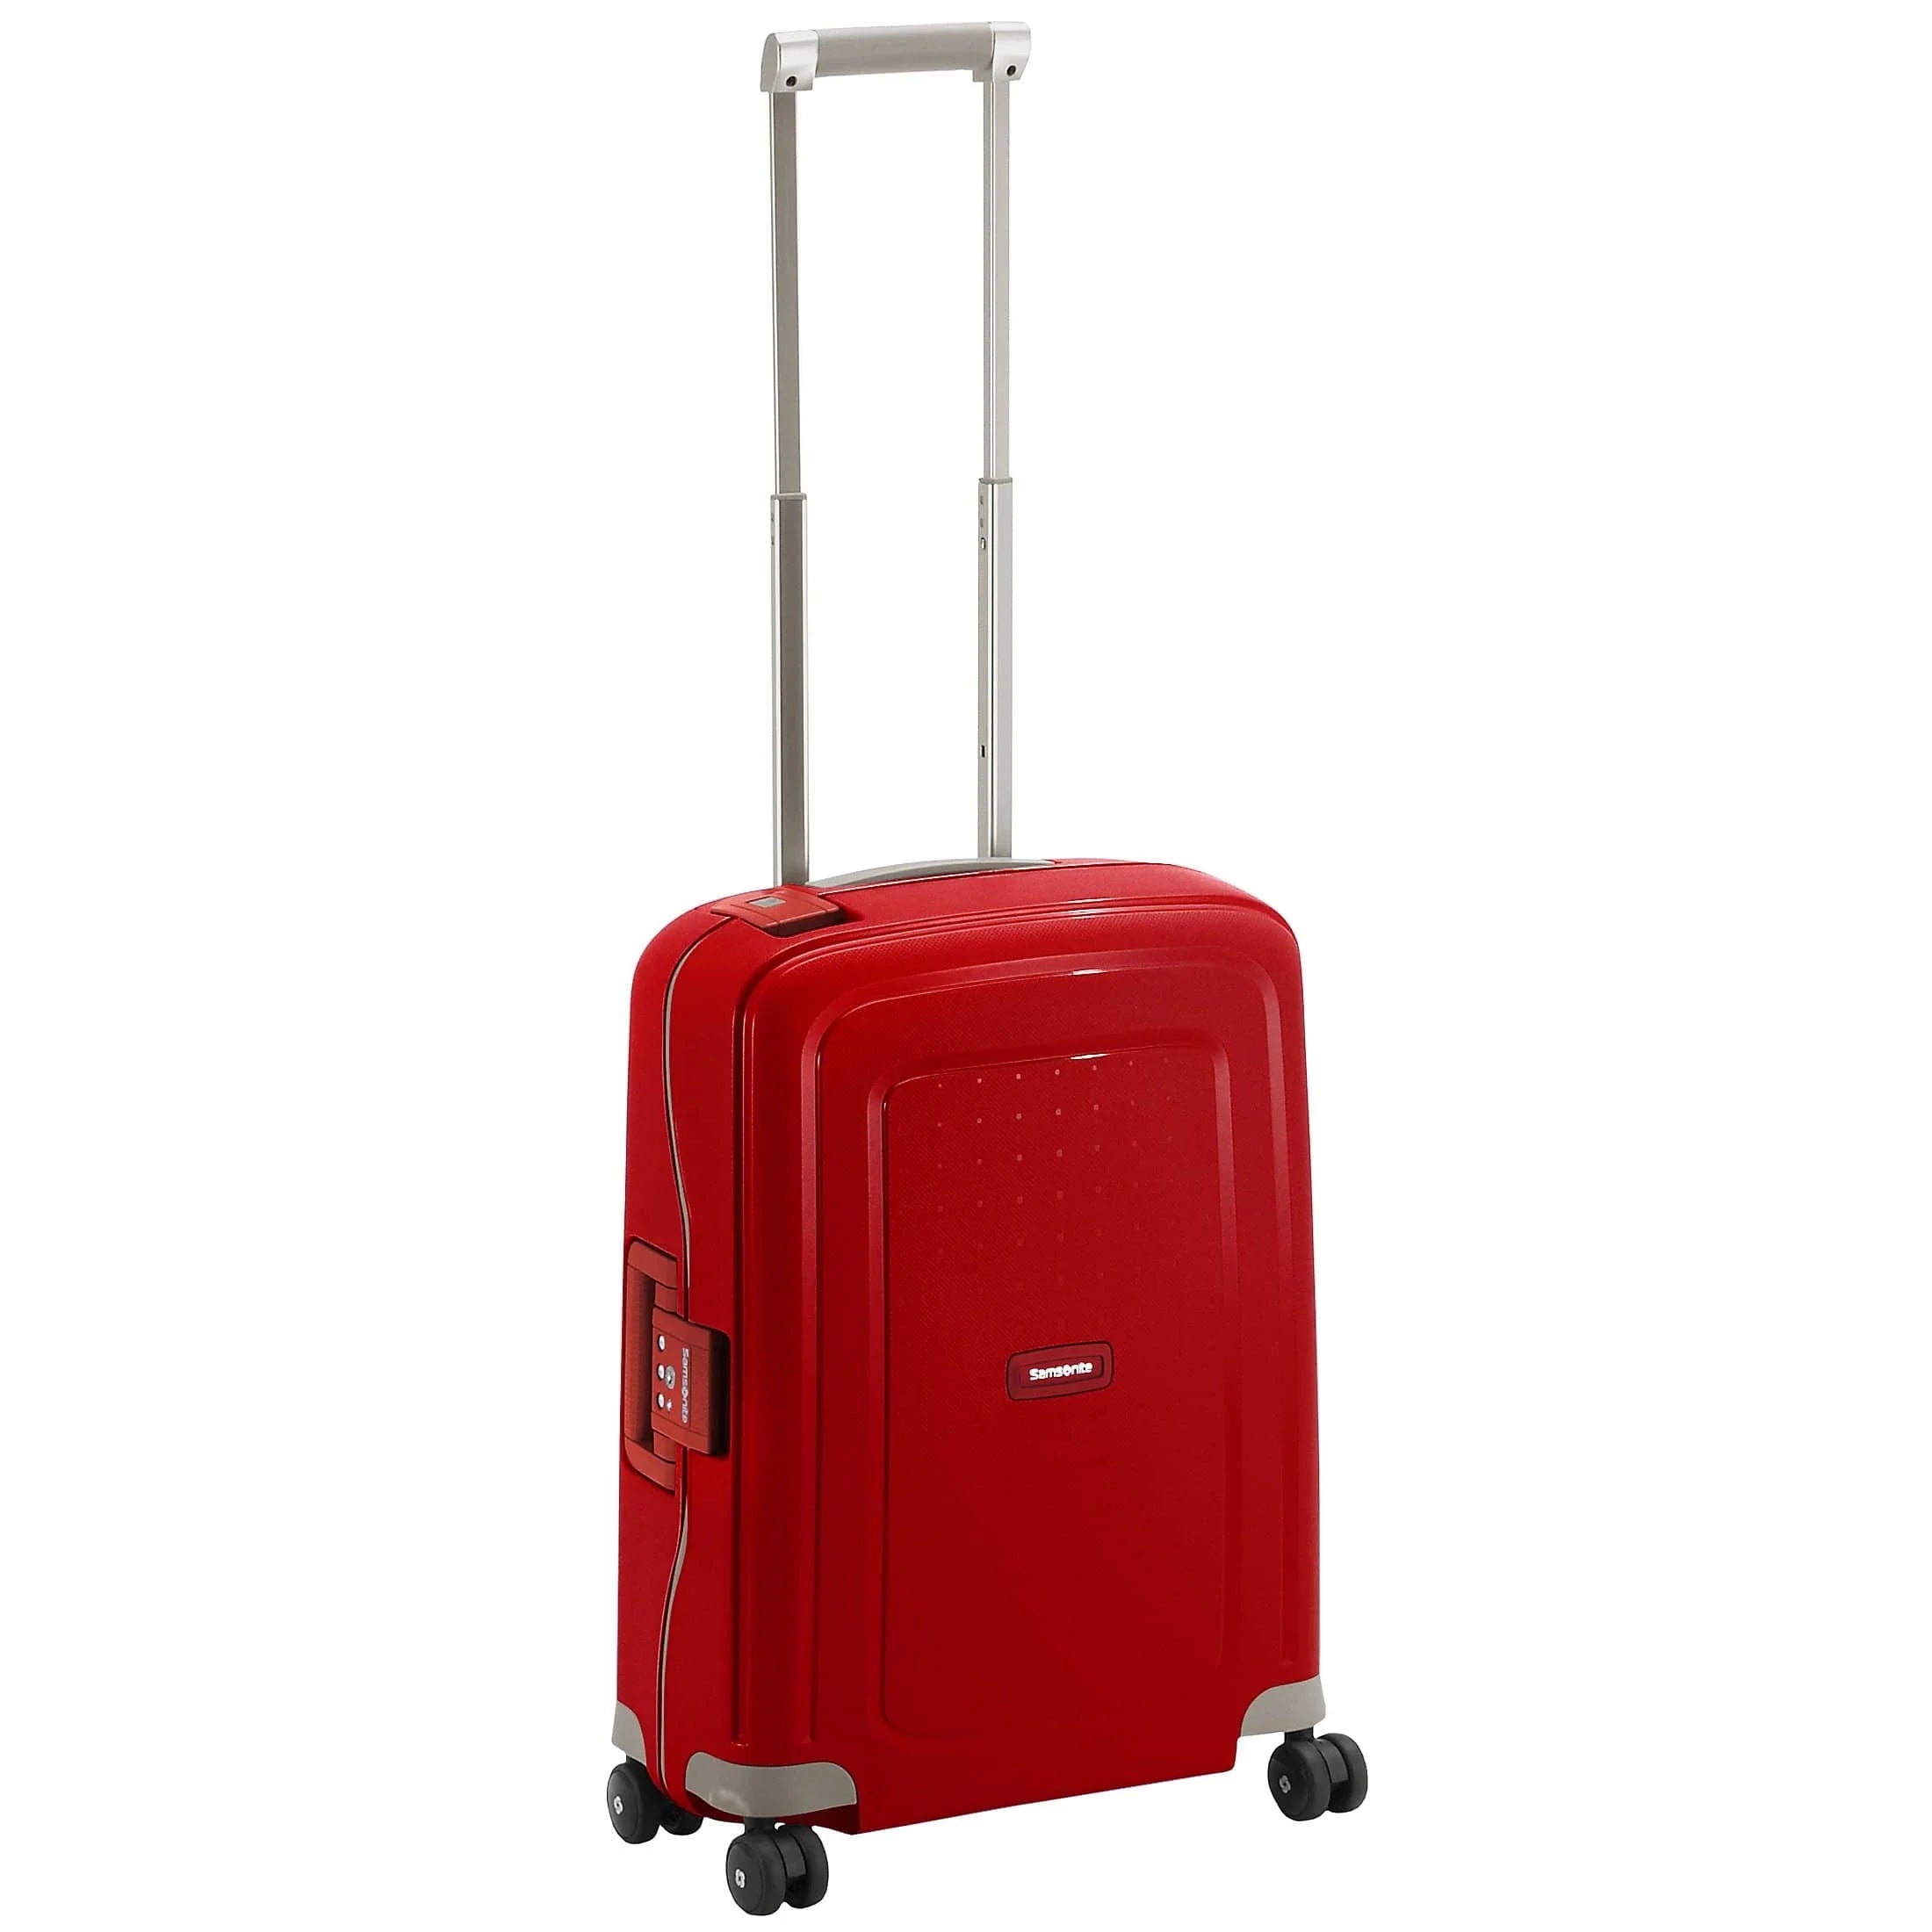 Samsonite S Cure Spinner trolley cabine 4 roues 55 cm - rouge cramoisi